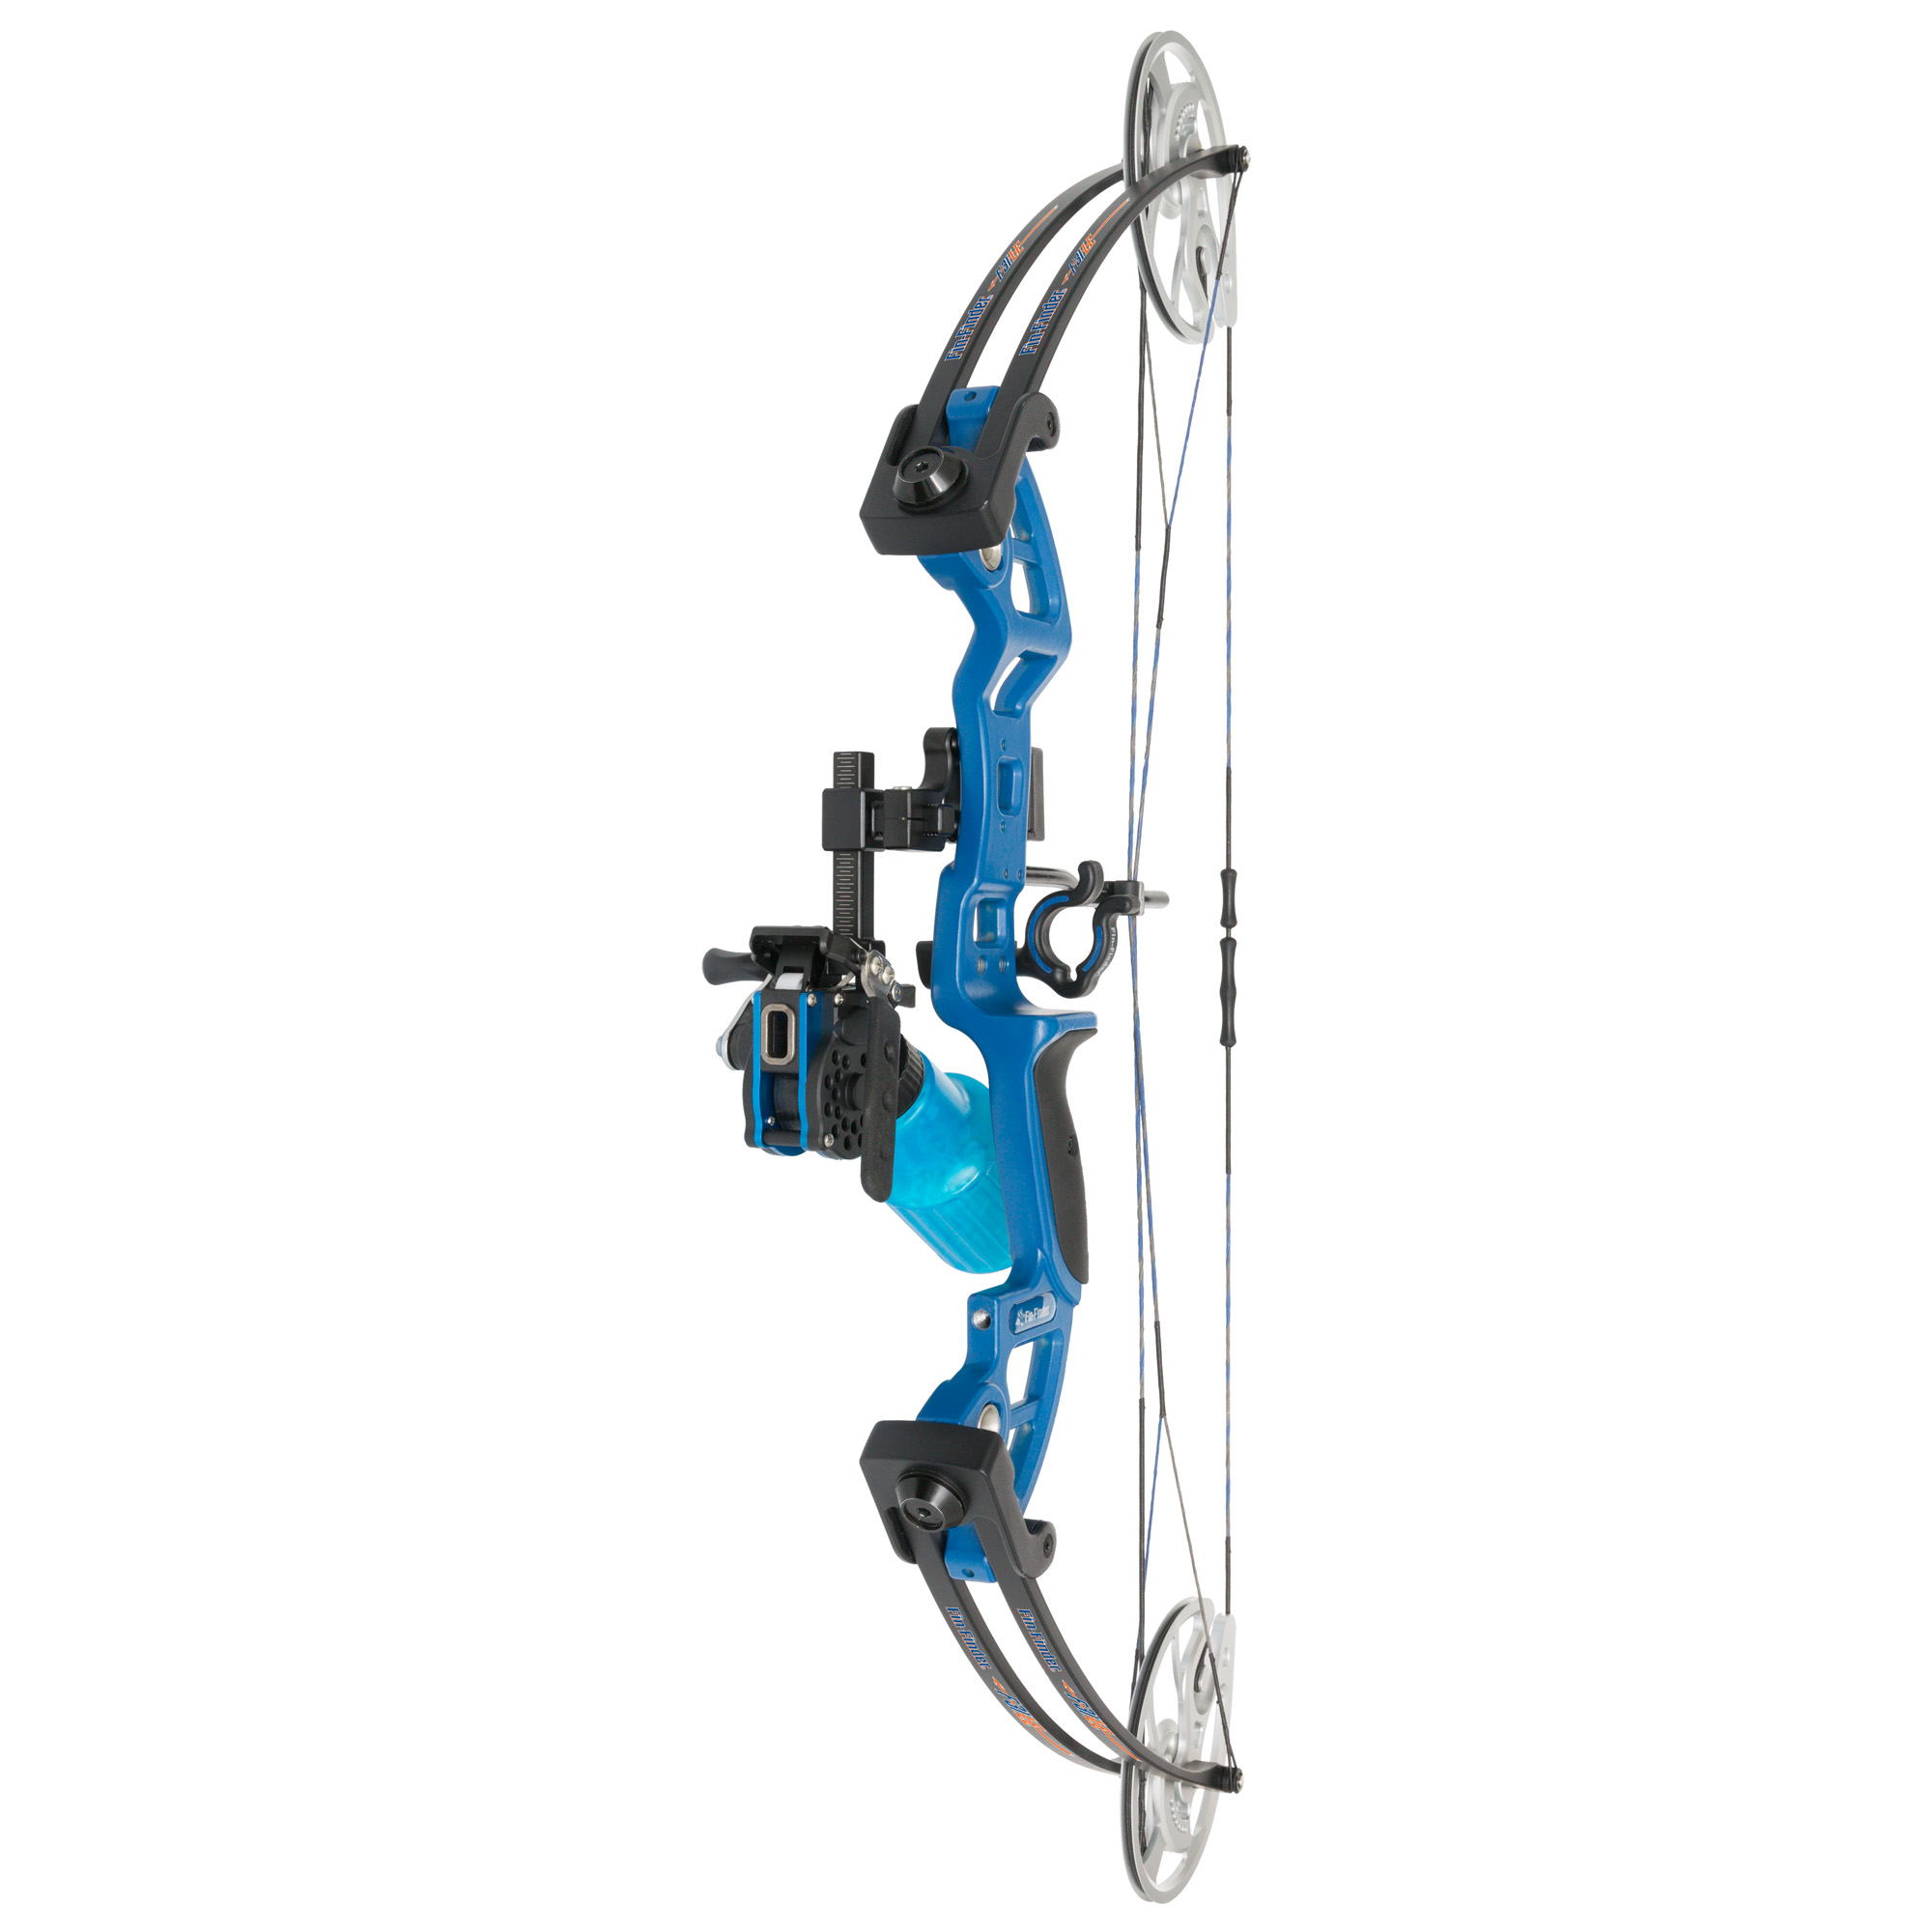 Archery Bow Fishing Reel Compound Recurve Bow Bowfishing Shooting Reel